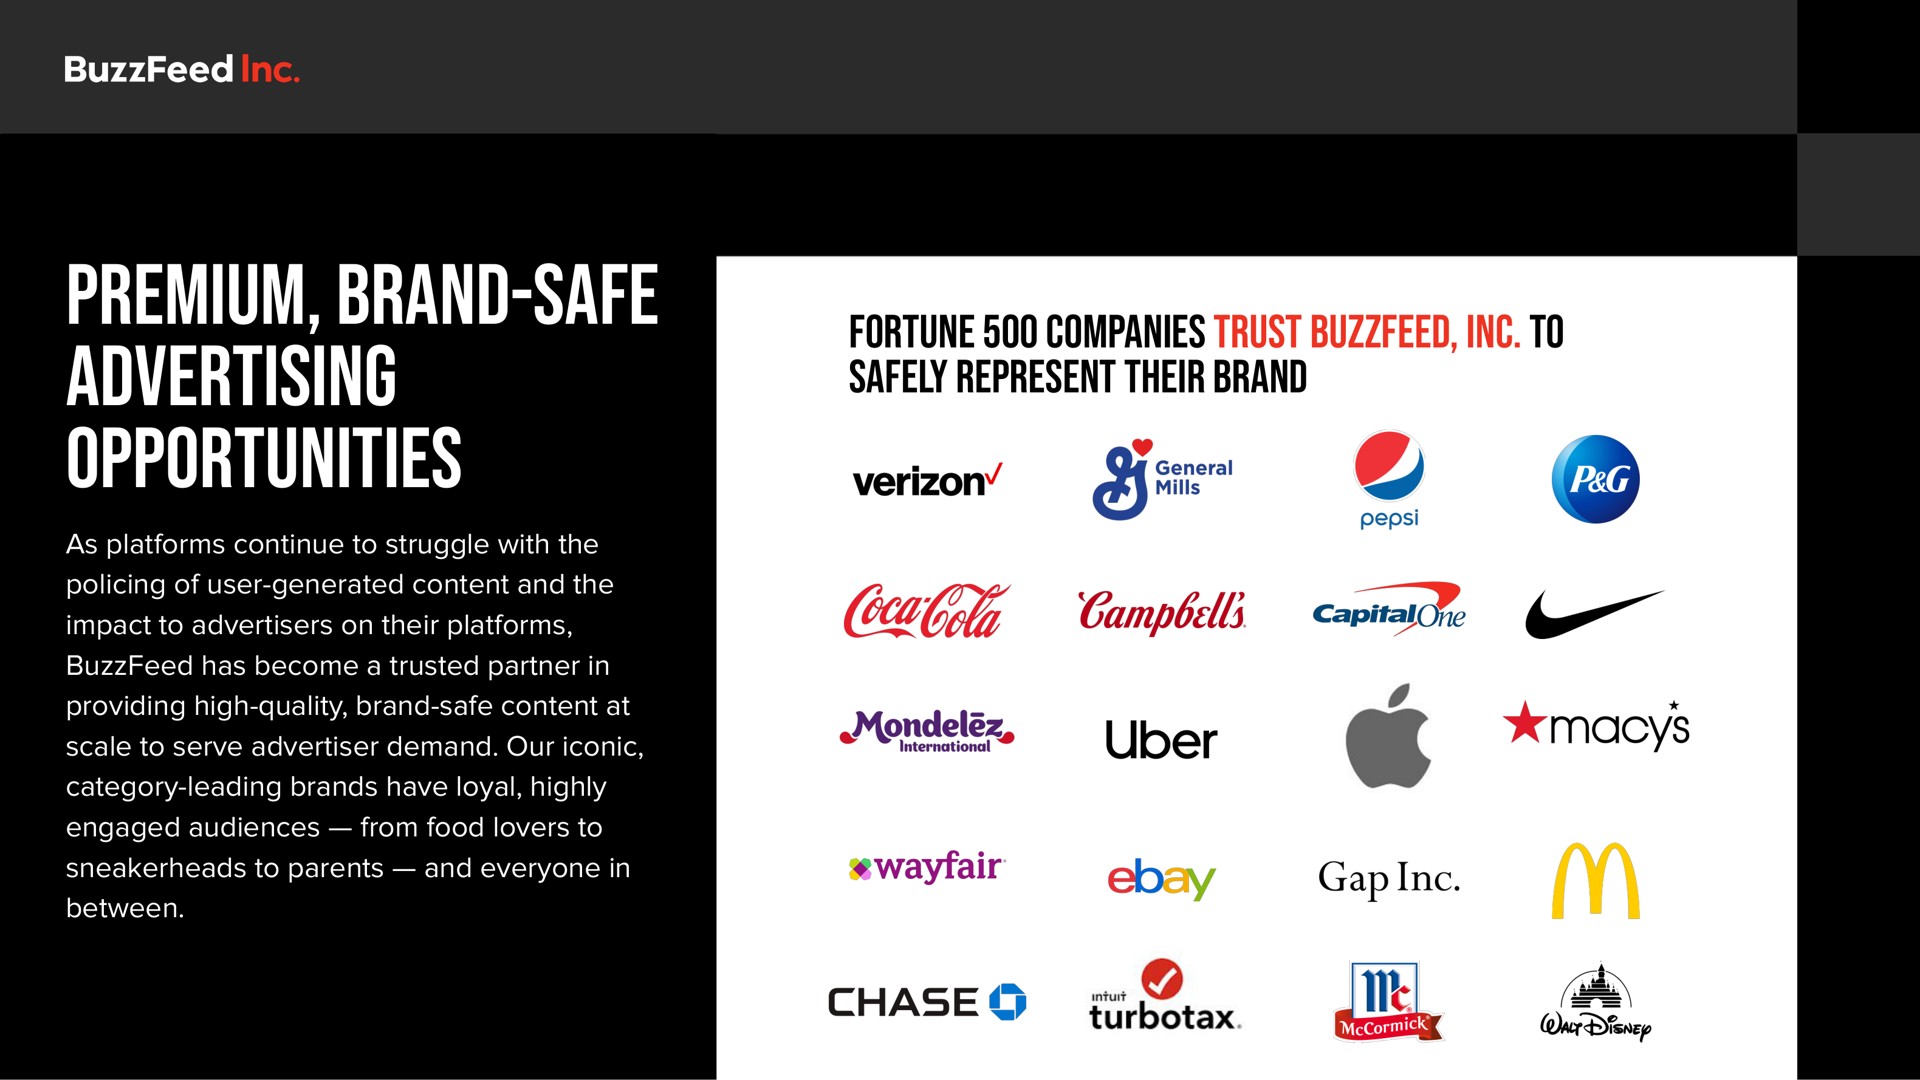 premium brand safe advertising opportunities sues fortune companies trust to safely represent their brand mills capitate | BuzzFeed